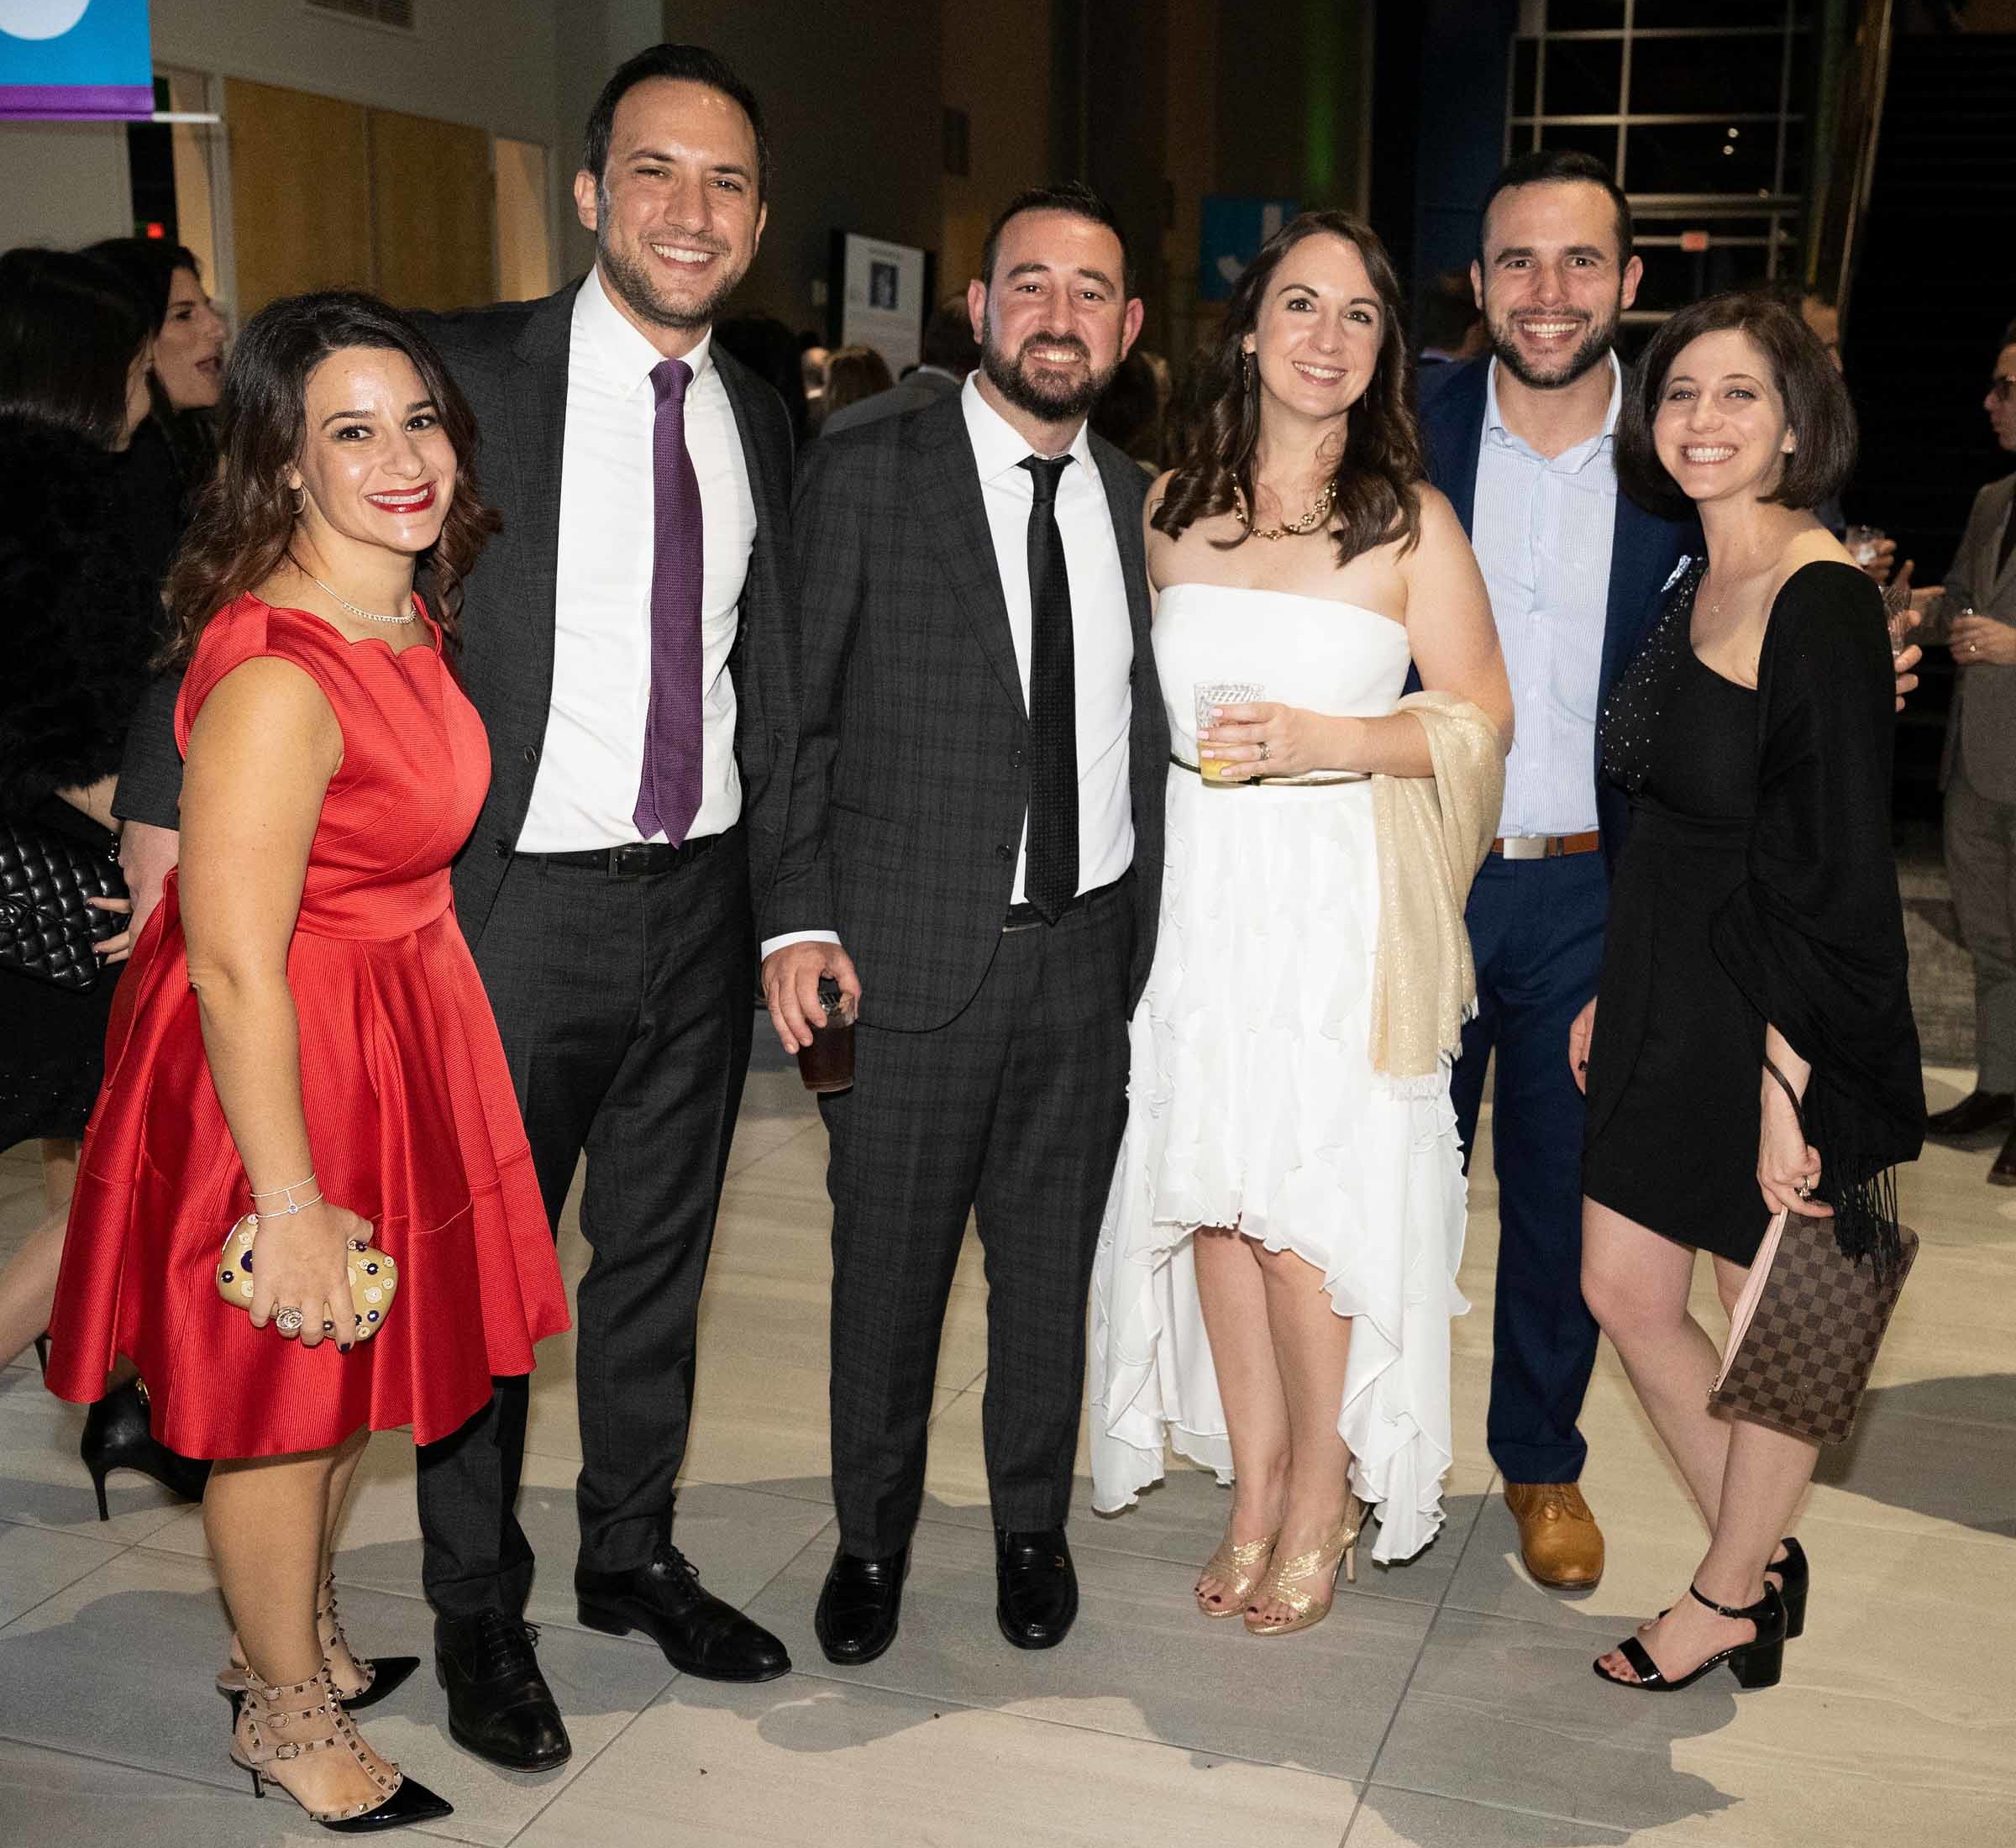 A group of people at a gala.